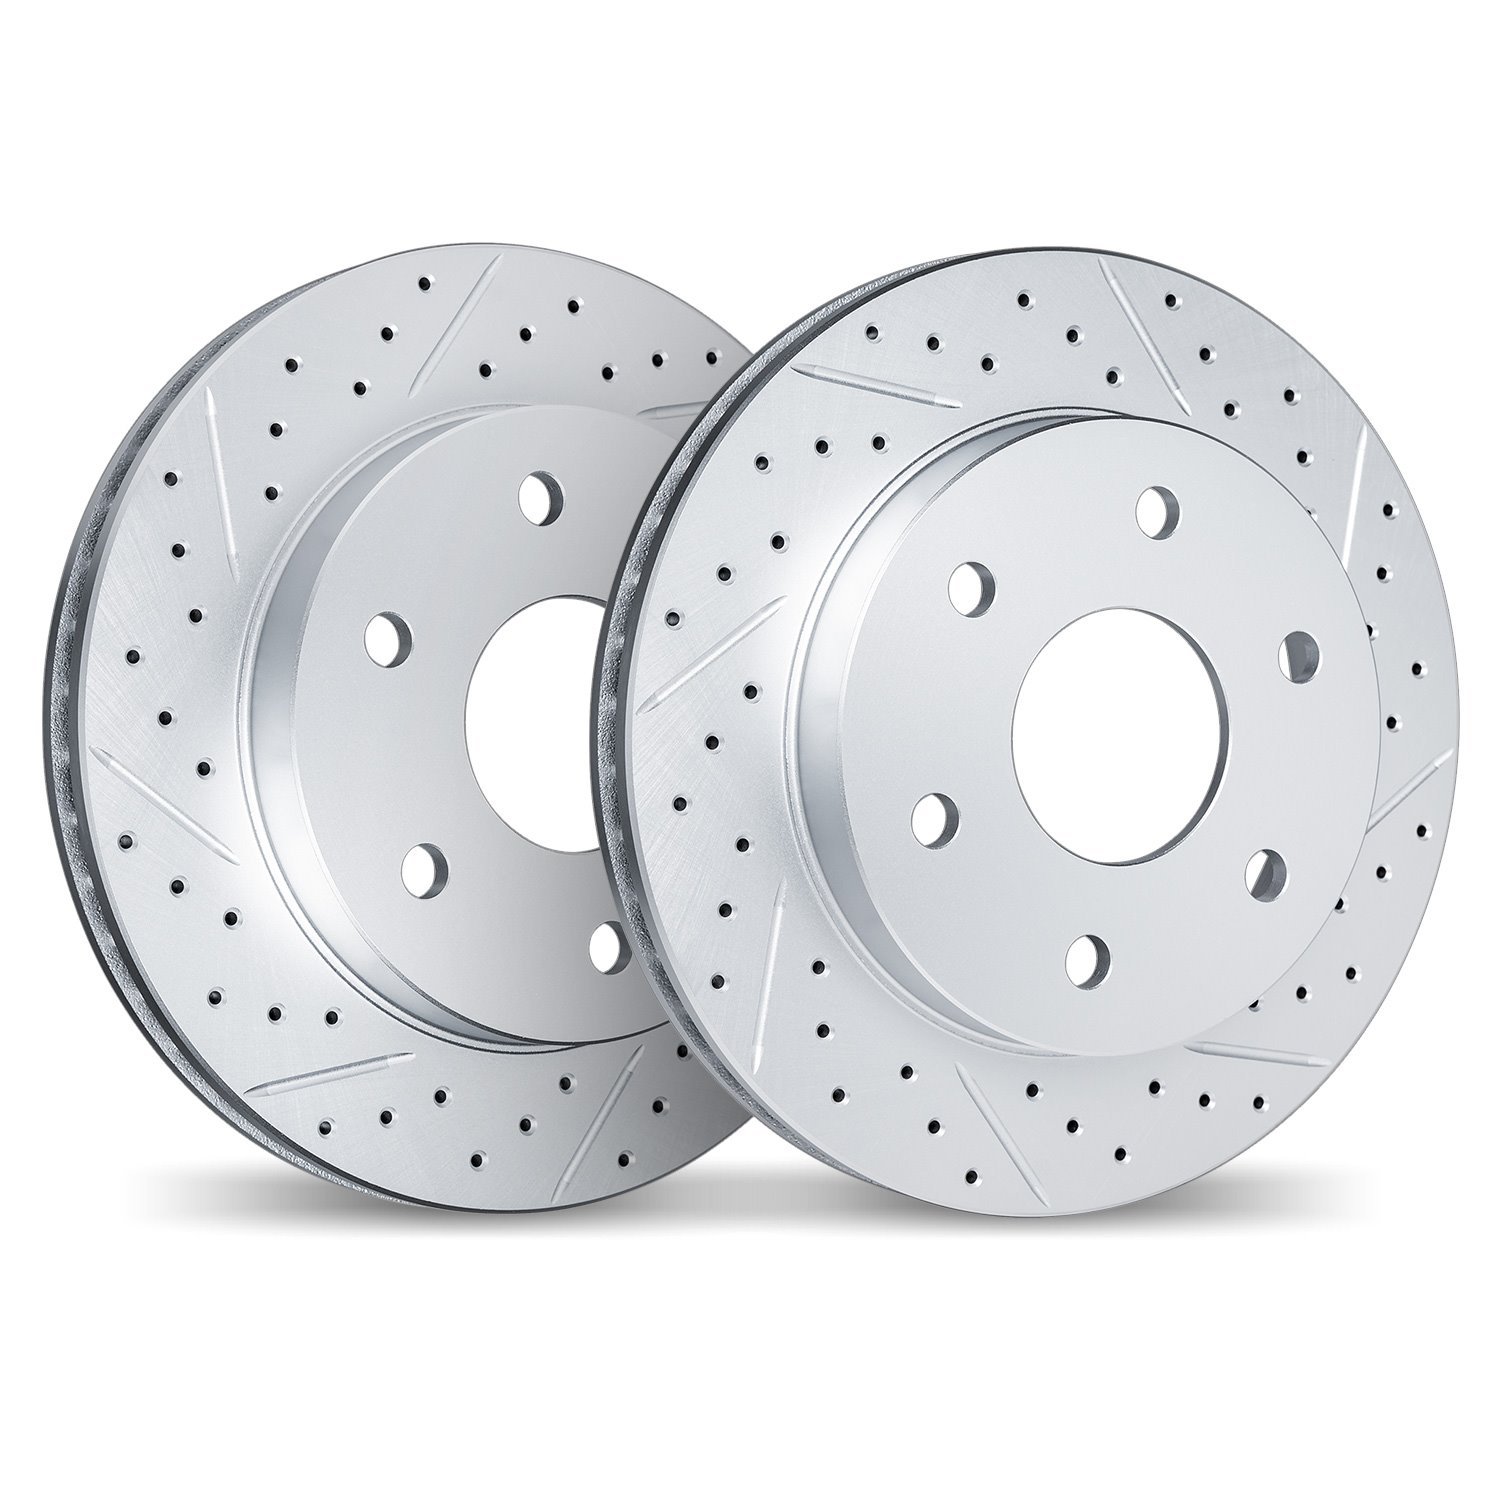 2002-52003 Geoperformance Drilled/Slotted Brake Rotors, 2006-2009 GM, Position: Front